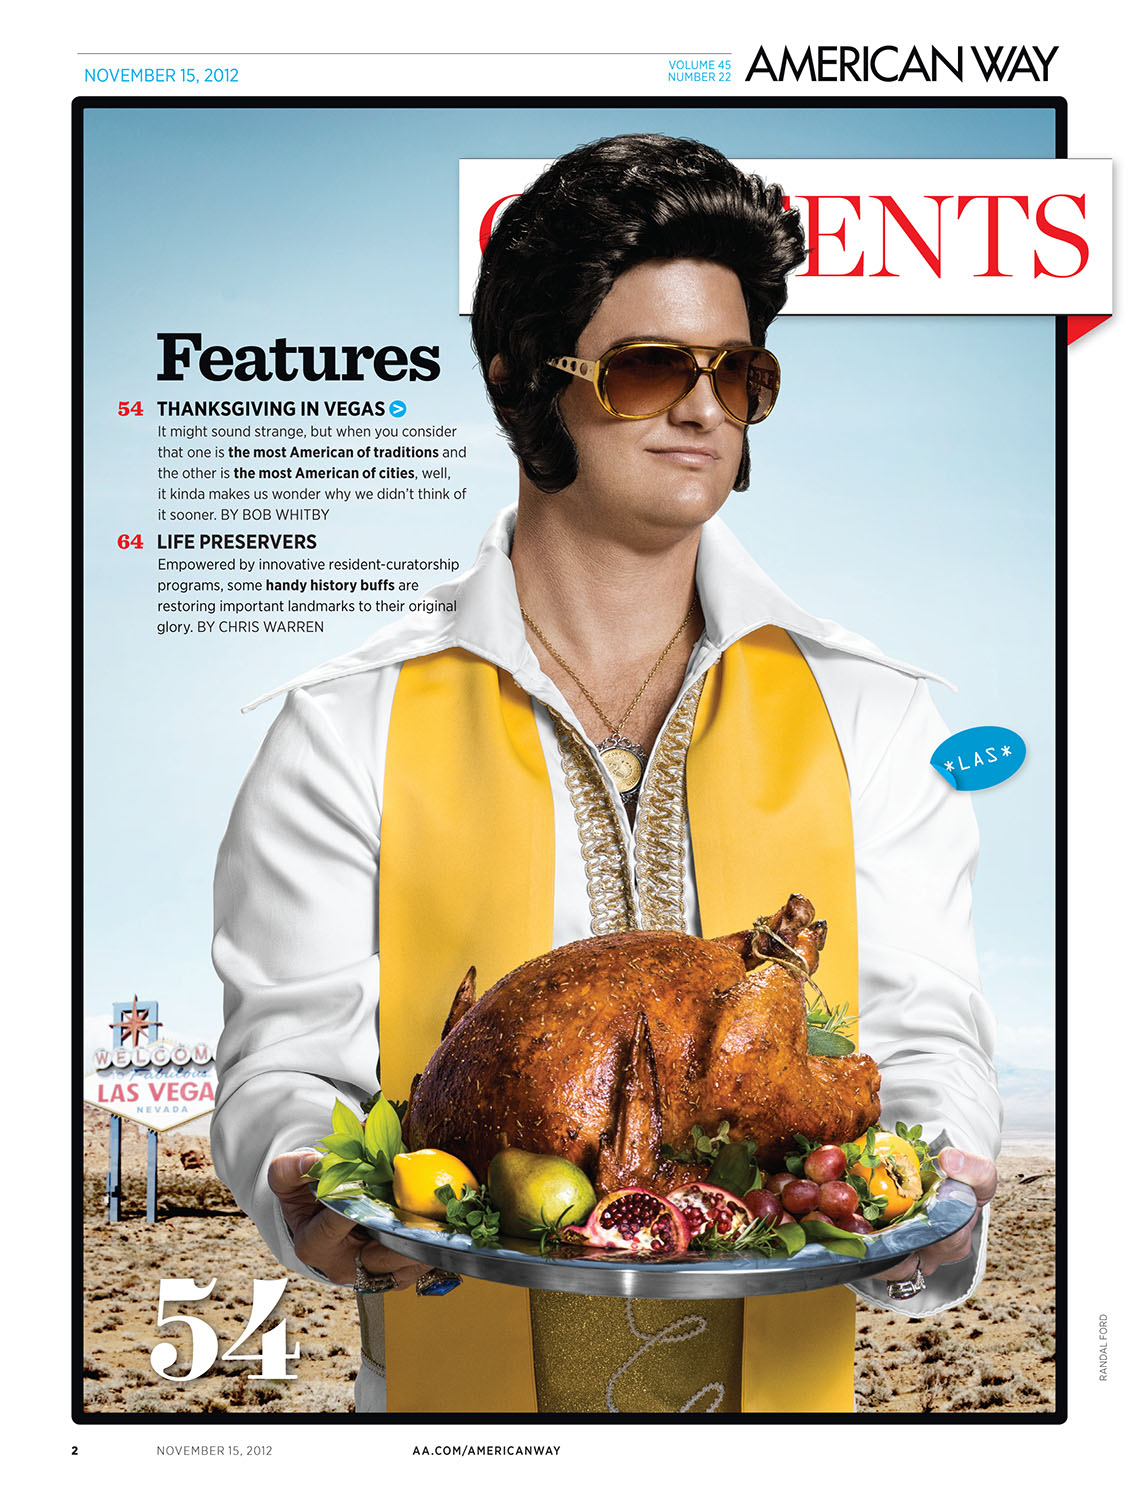    The&nbsp;   table of contents from &nbsp;American Way,&nbsp; November 15, 2012  